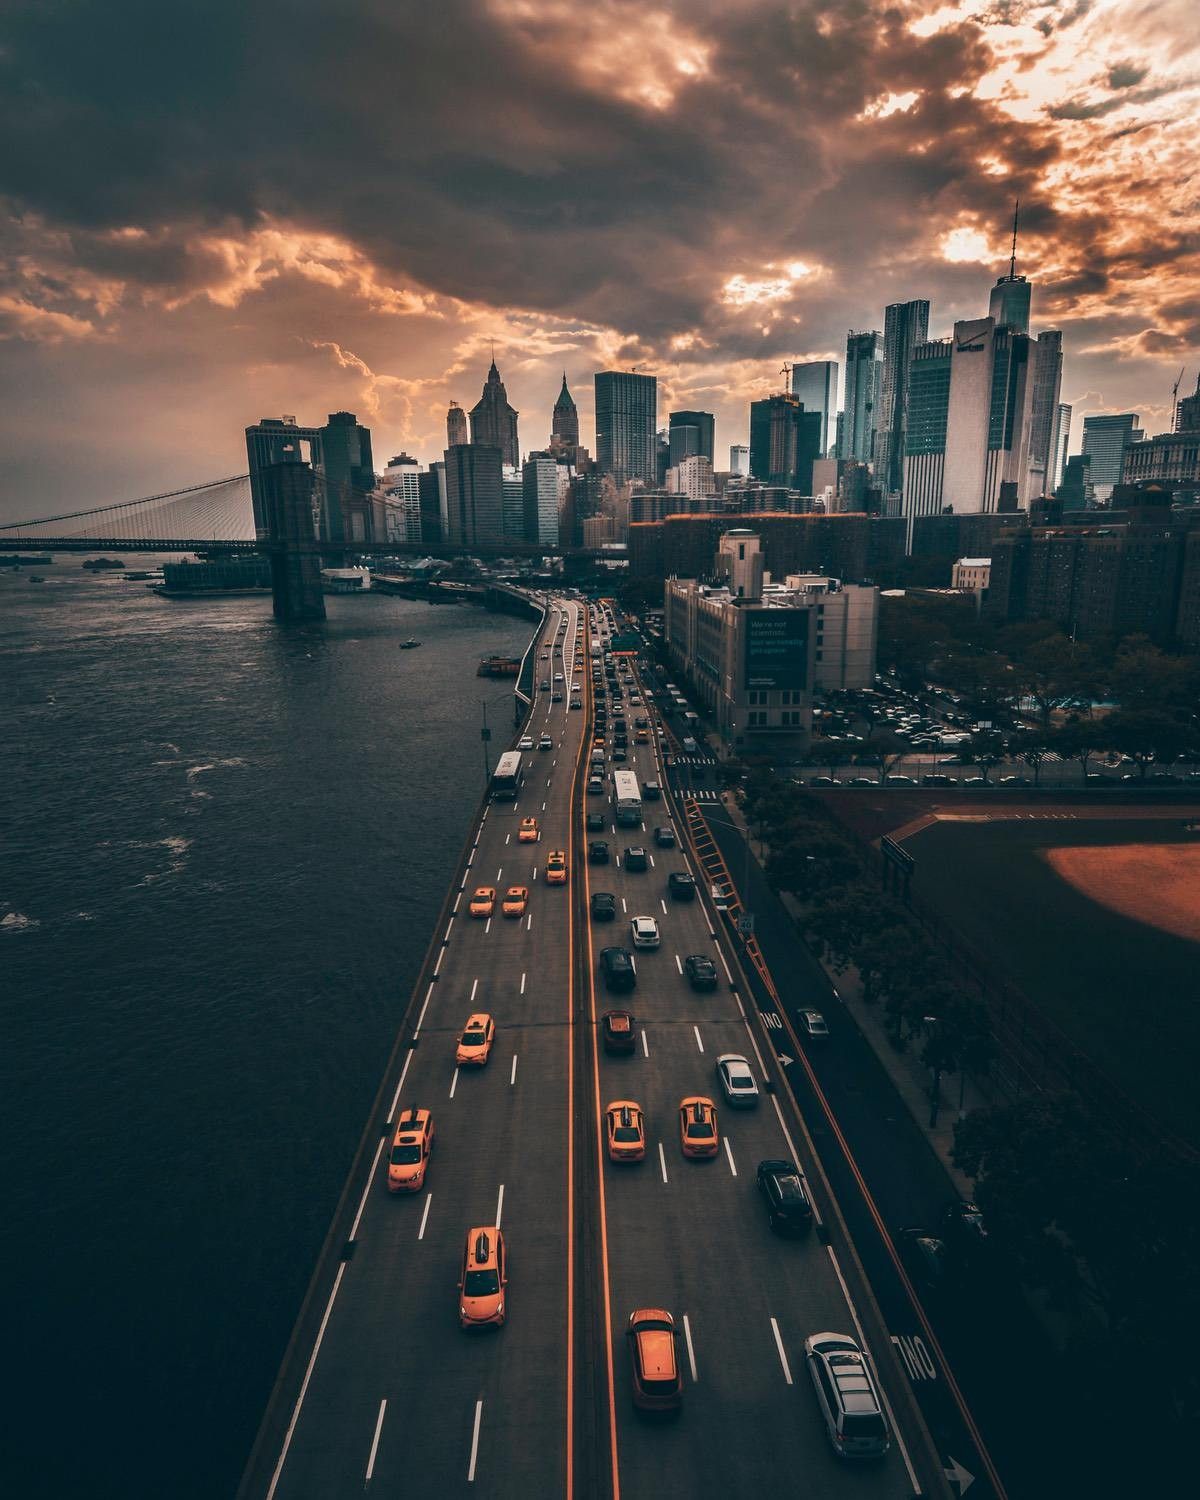 A busy highway with cars and taxis leading into a city. - City, road, New York